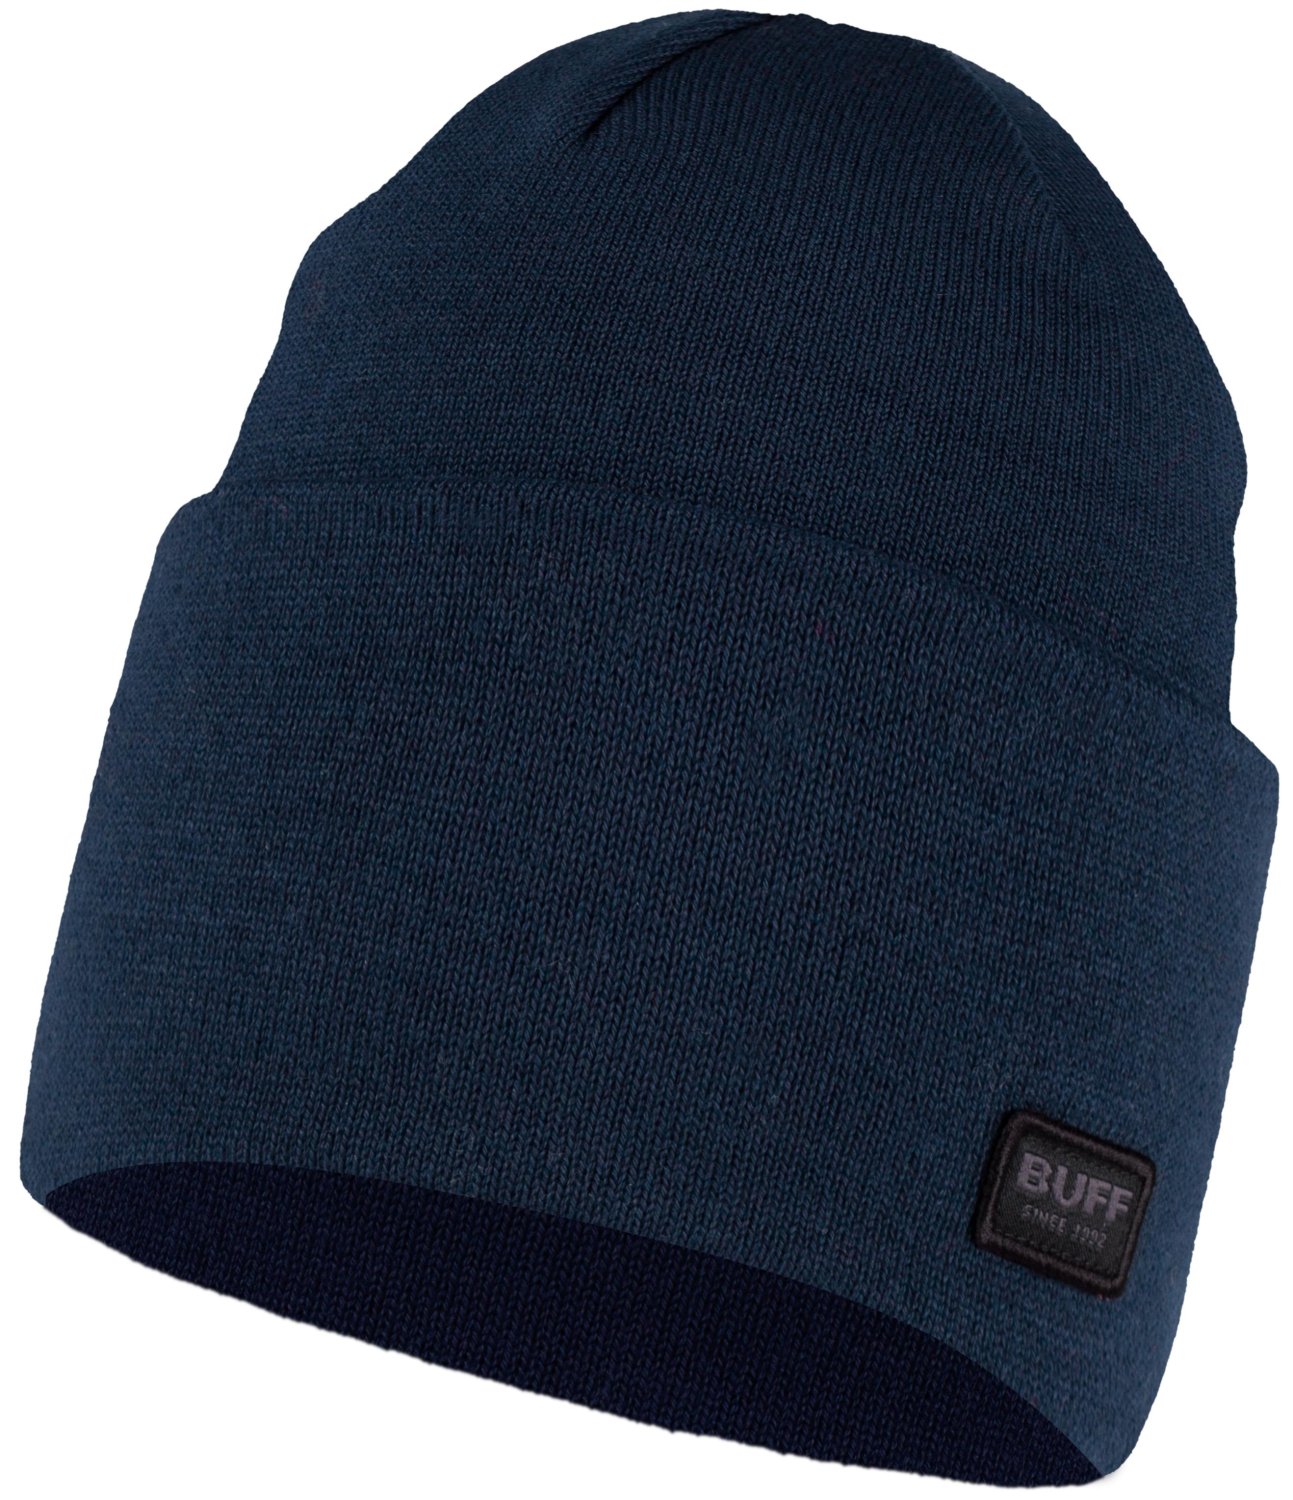 Шапка Buff Knitted Hat Niels Denim, US:one size, 126457.788.10.00 шапка buff knitted hat niels denim us one size 126457 788 10 00